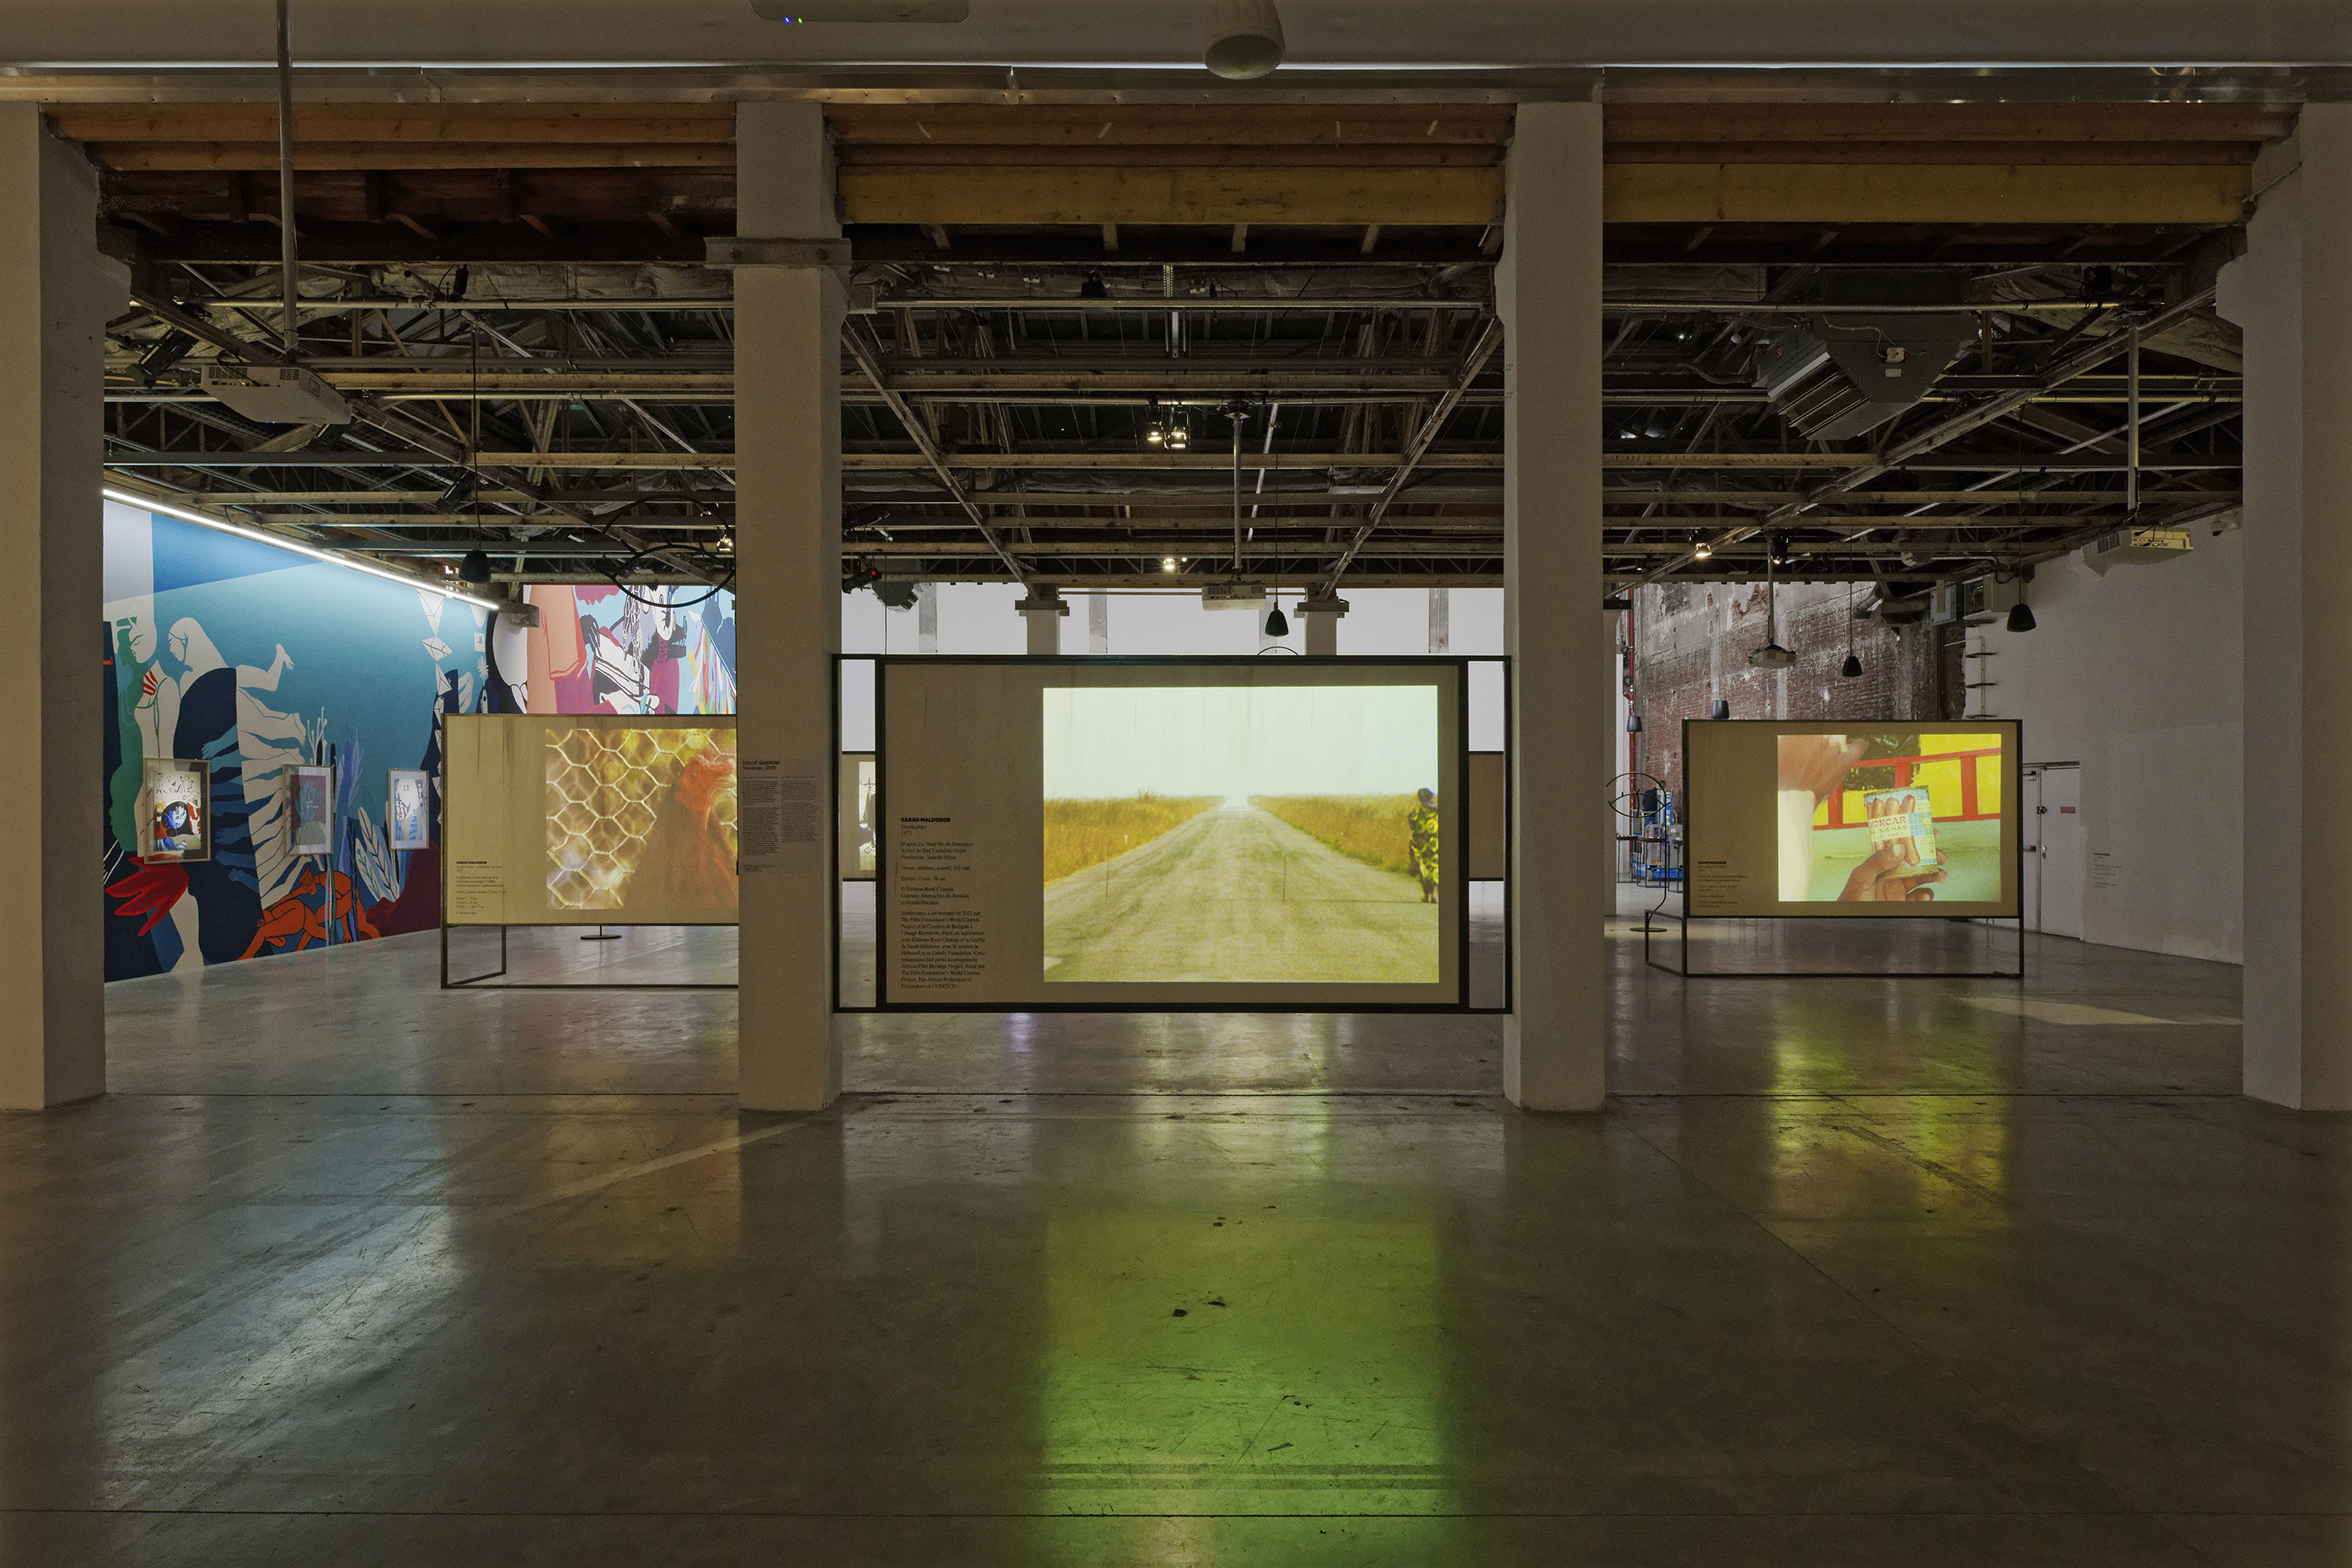 Installation view with films projected onto rectangular apparatuses. A colorful wall mural to the left extends backwards. Ceiling scaffolding is exposed.